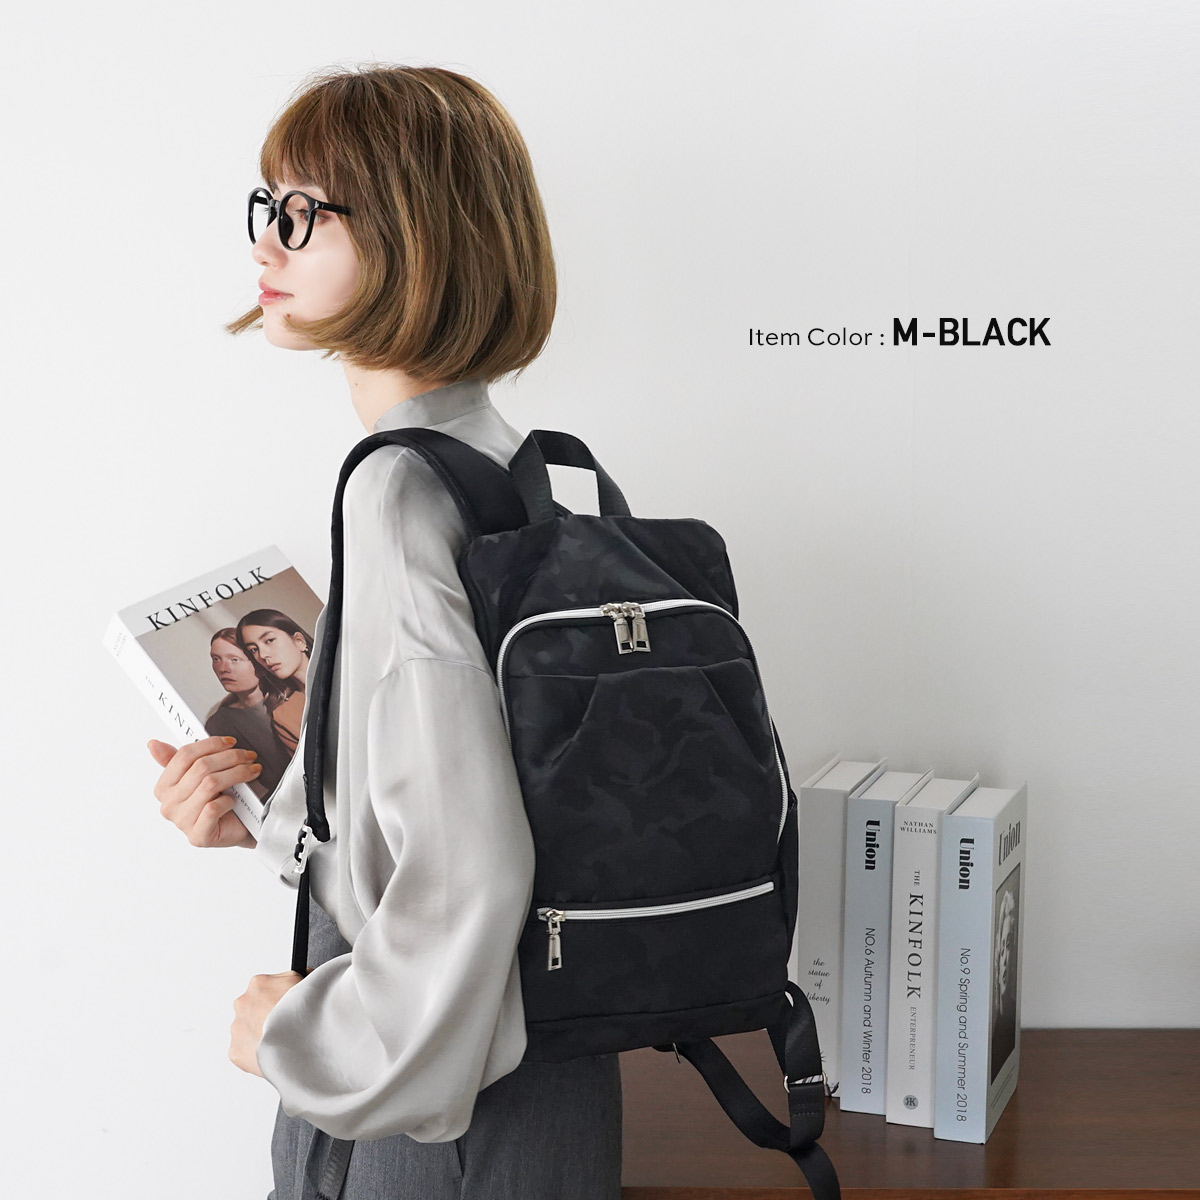  Customer reviews: Japan Anello Backpack Unisex MINI SMALL BLACK  Rucksack Waterproof Canvas Campus Bag, (H 32 x W 23 x D 14cm)